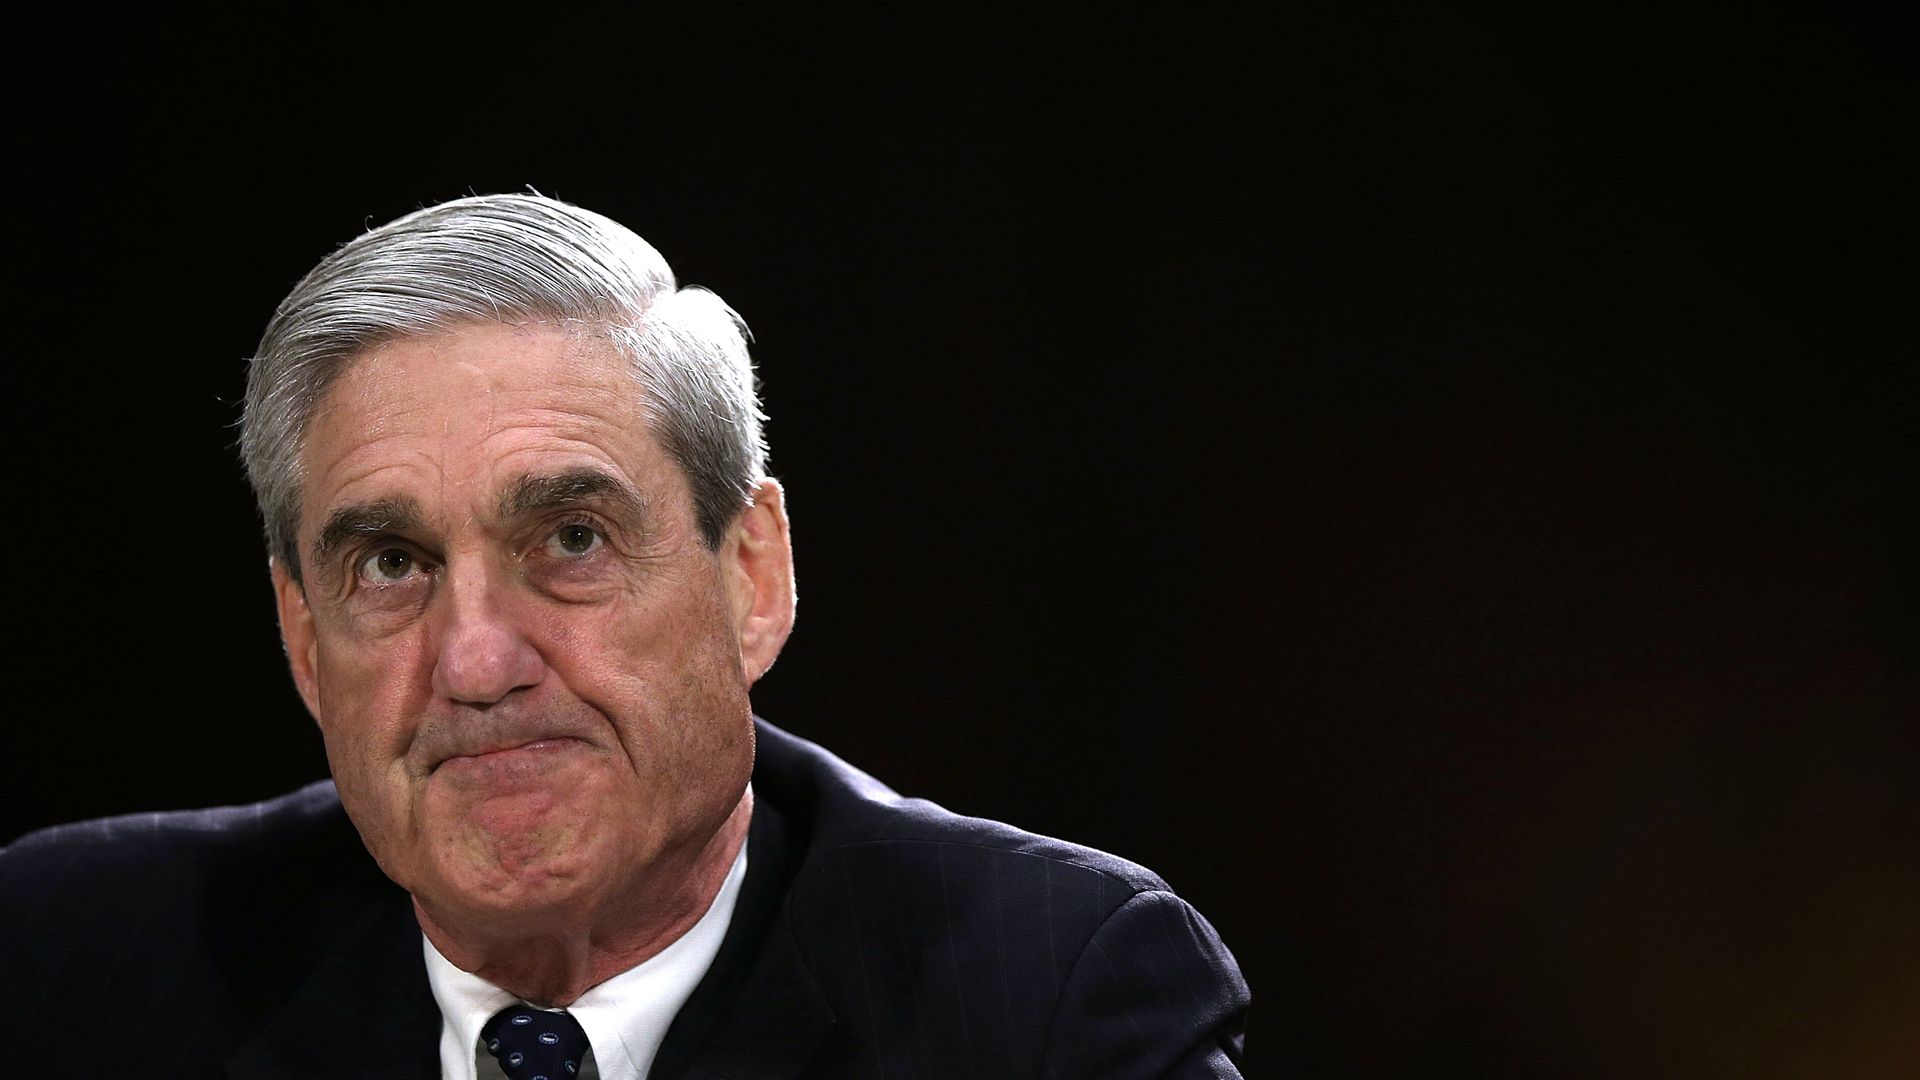 This is an image of Robert Mueller frowning